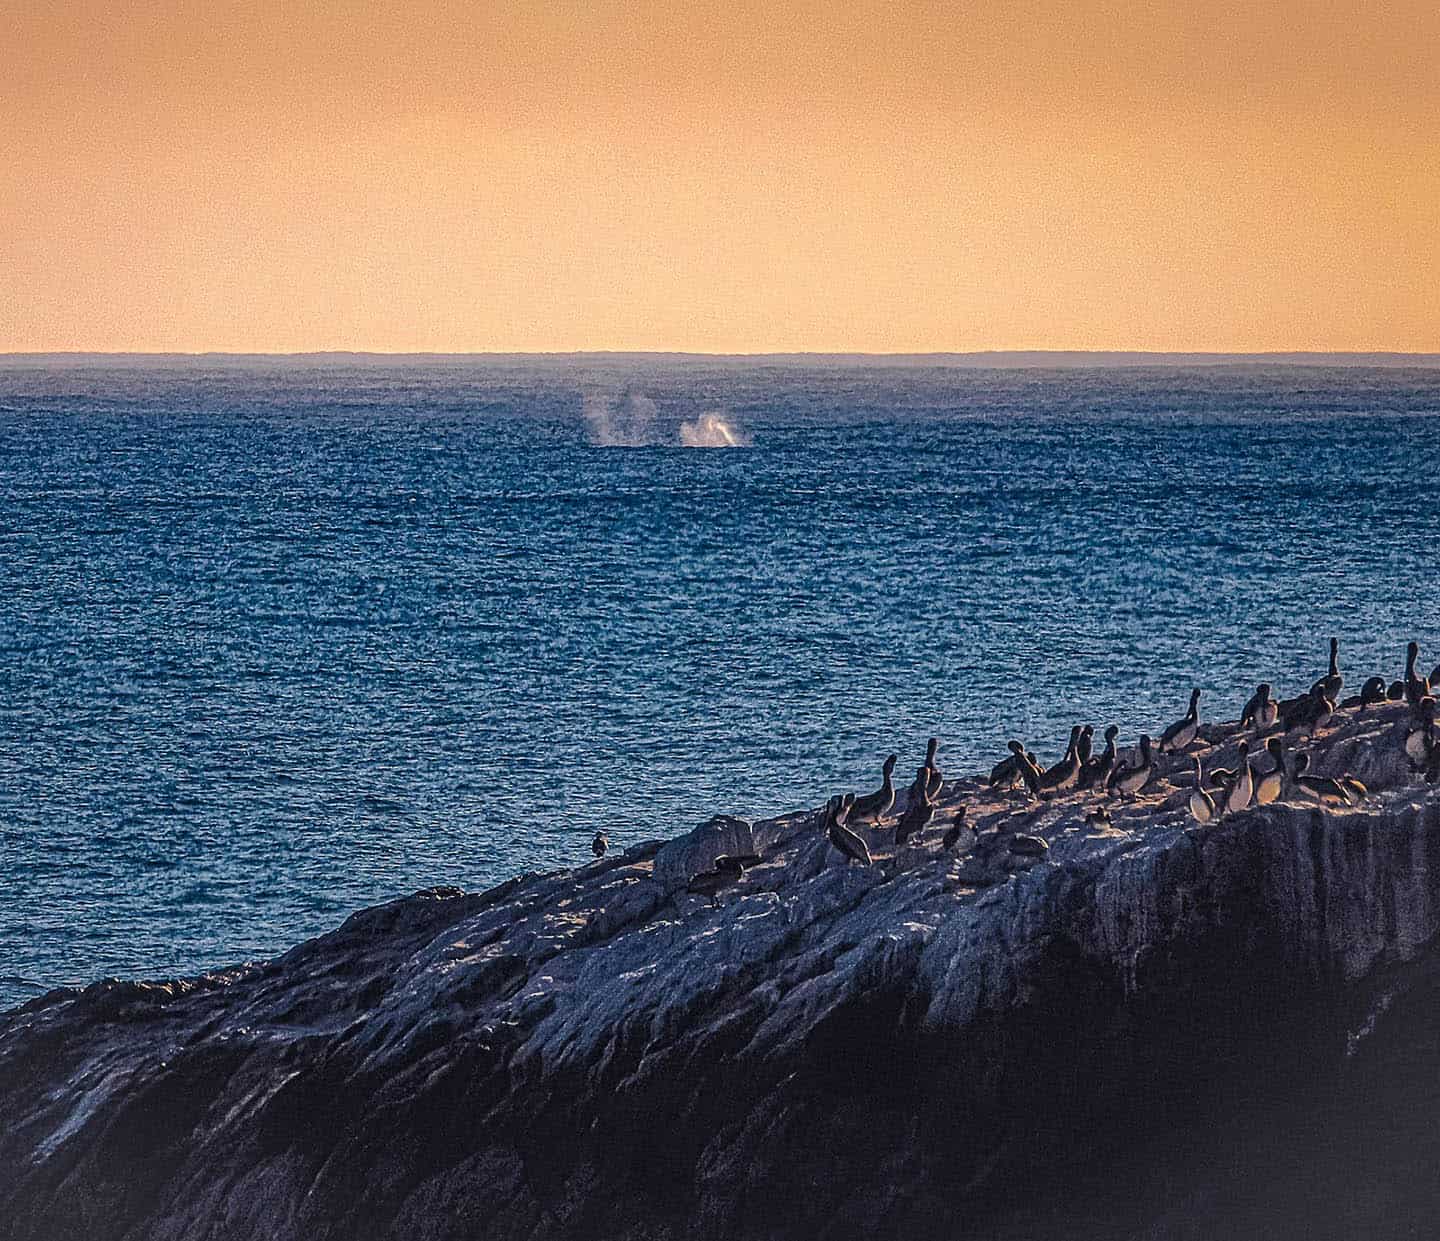 Whale blows from the Bouchard Trail toward the Piedras Blancas Light Station by Danna Dykstra-Coy